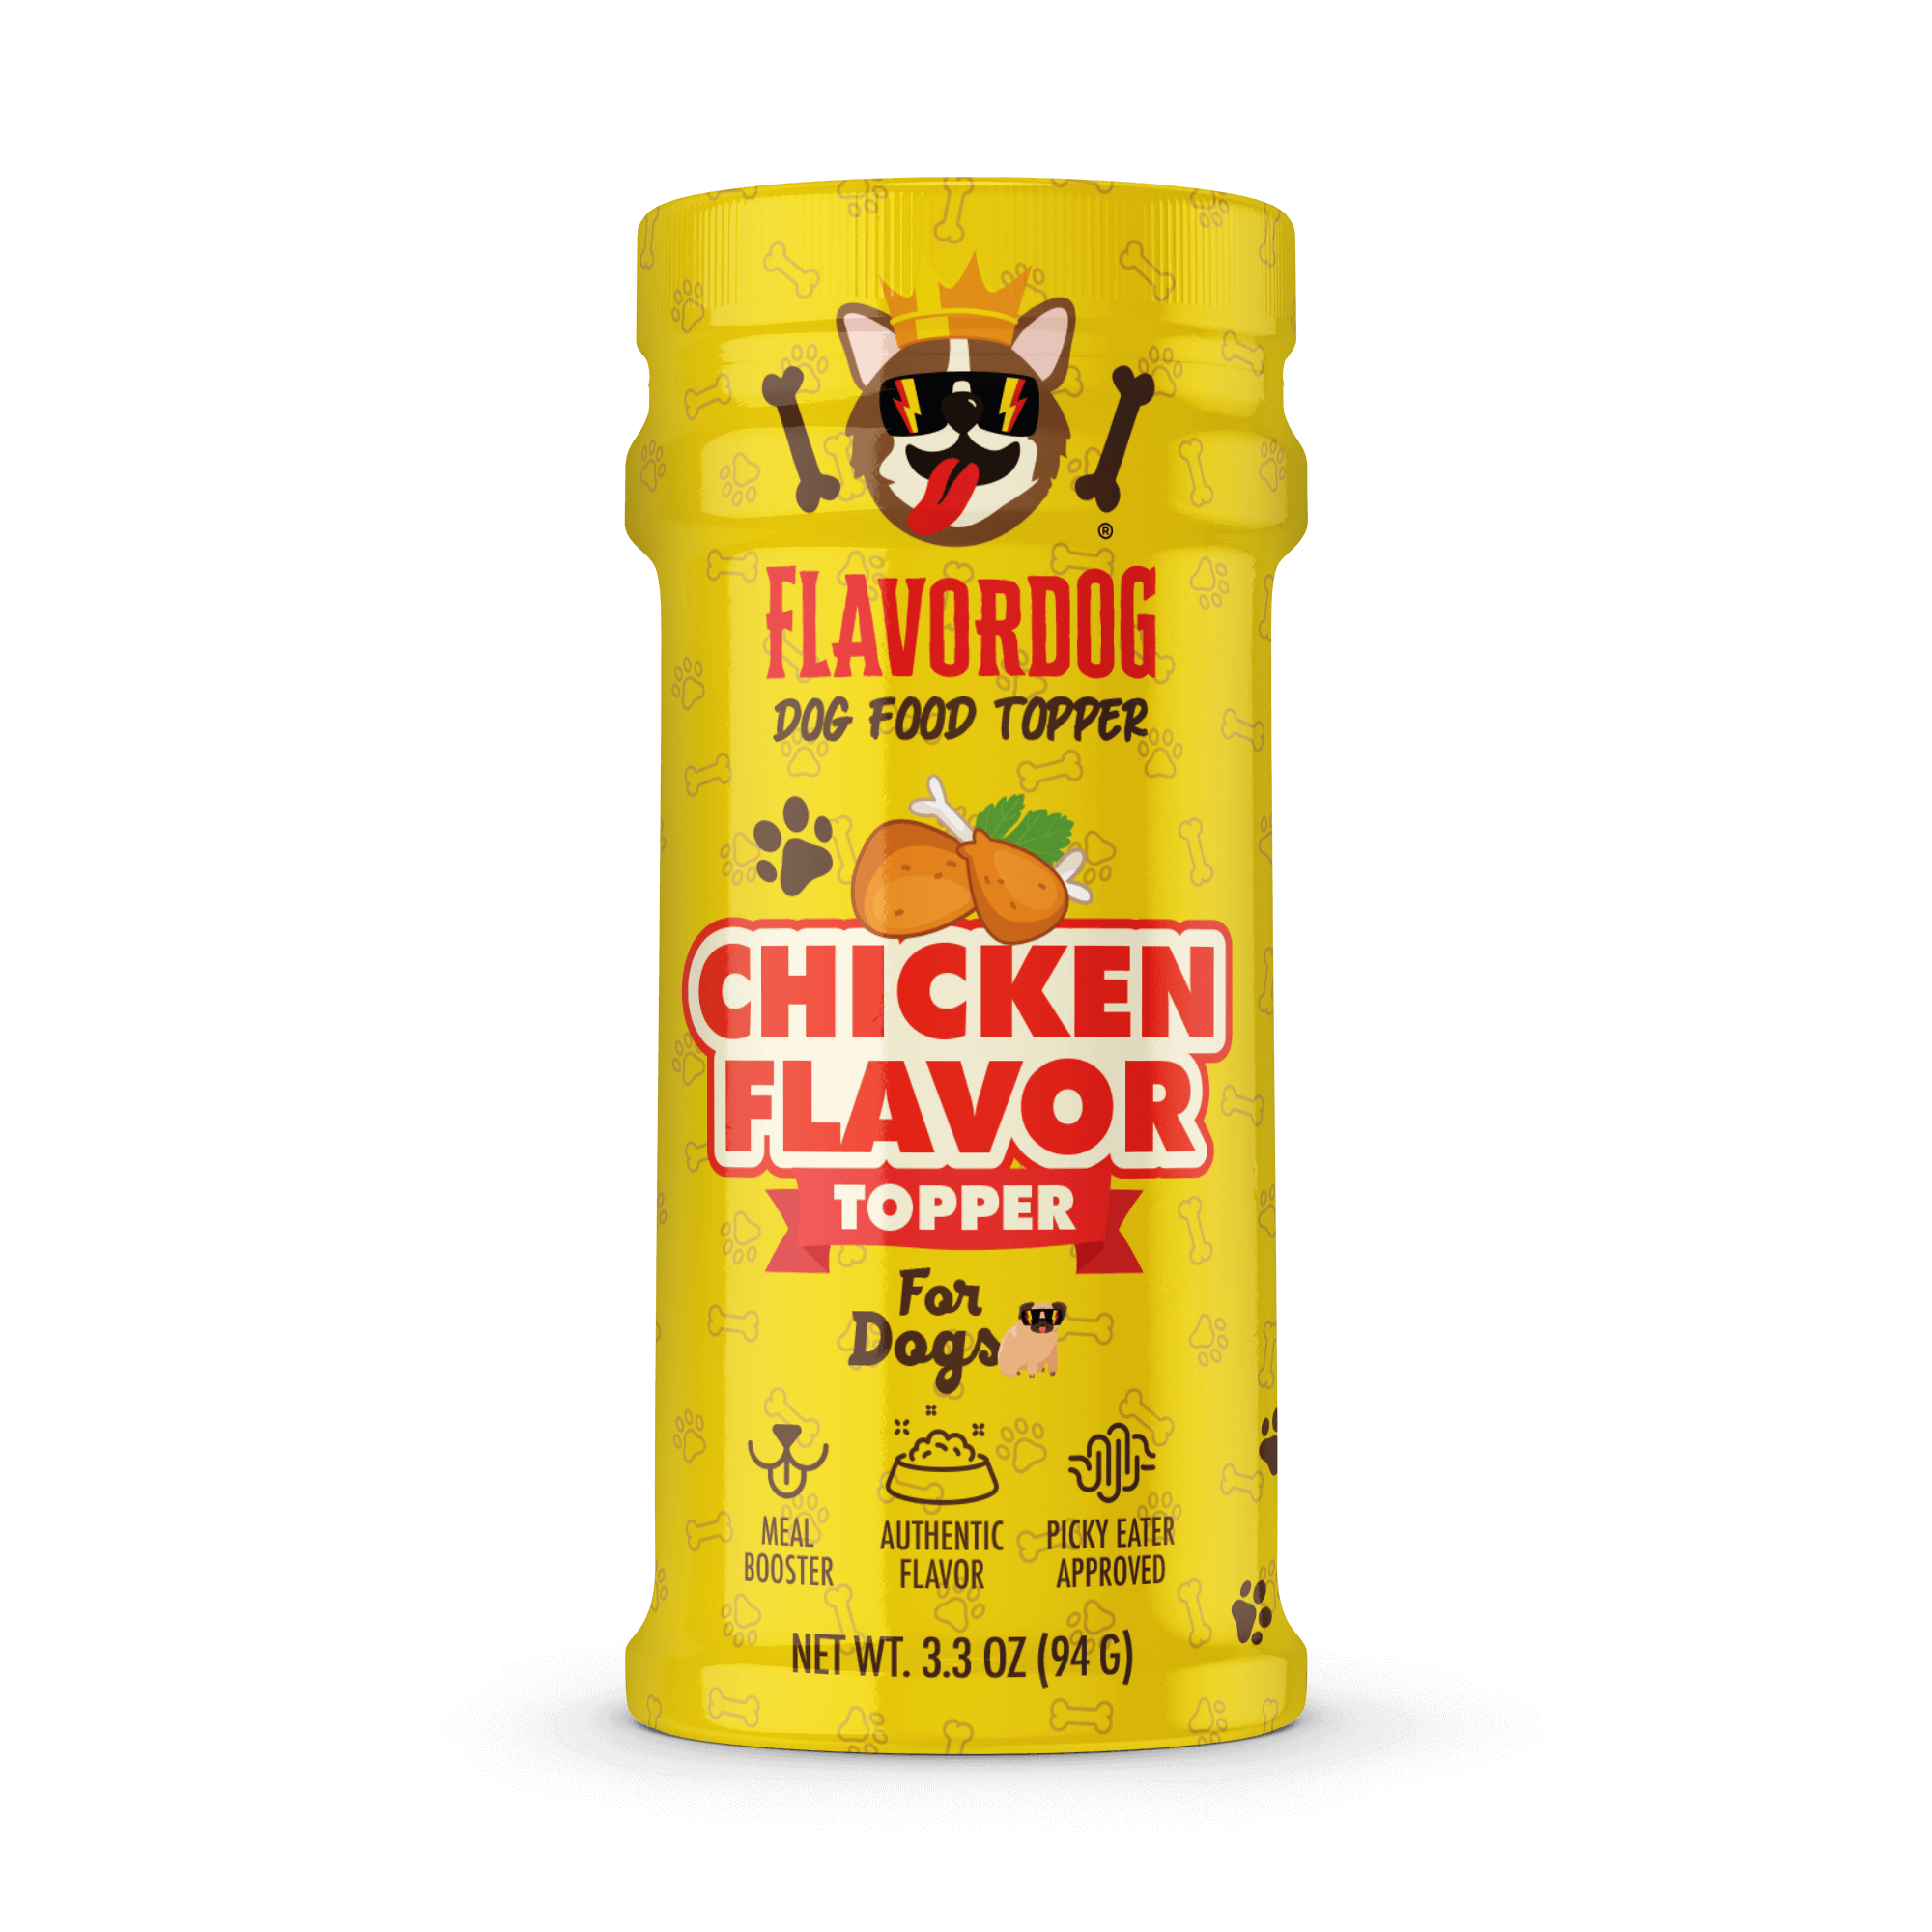 What's included in Chicken Flavor Topper